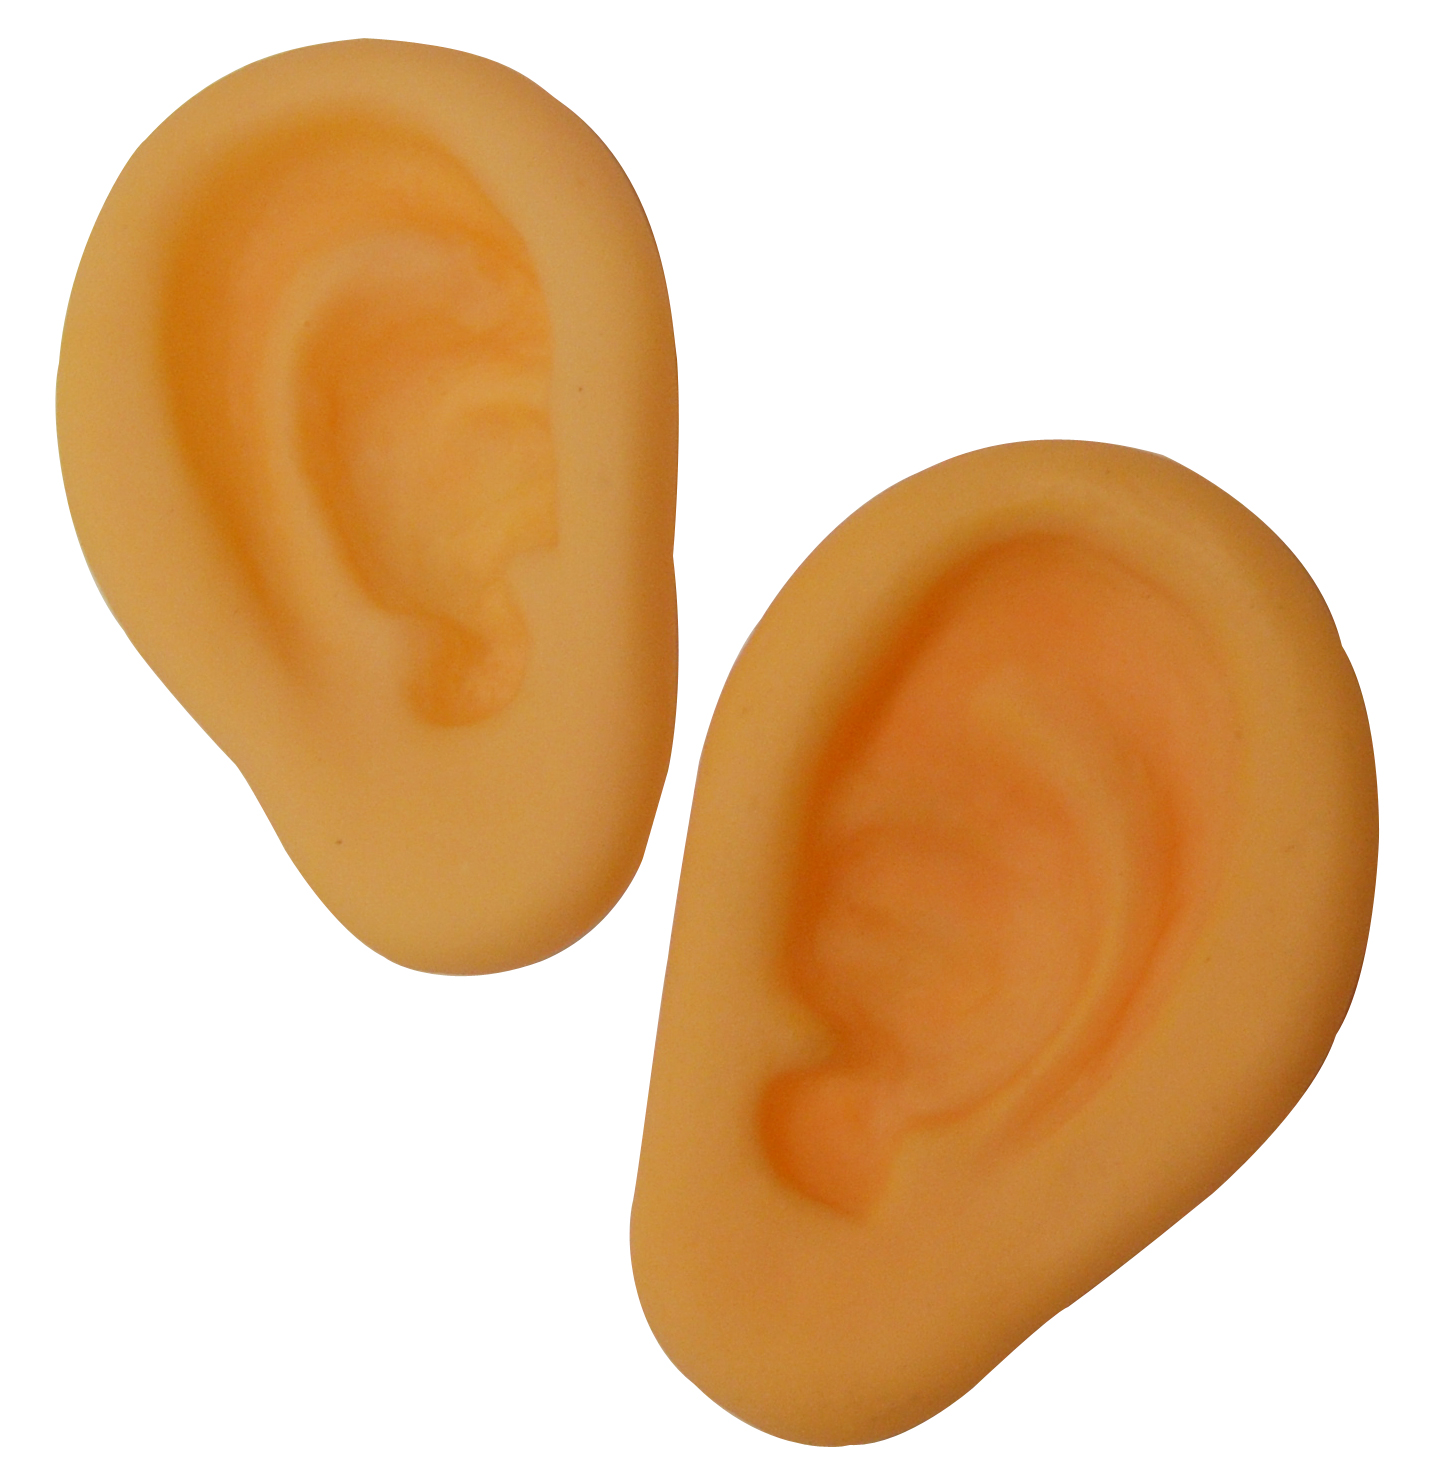 free clipart listening ears - photo #40